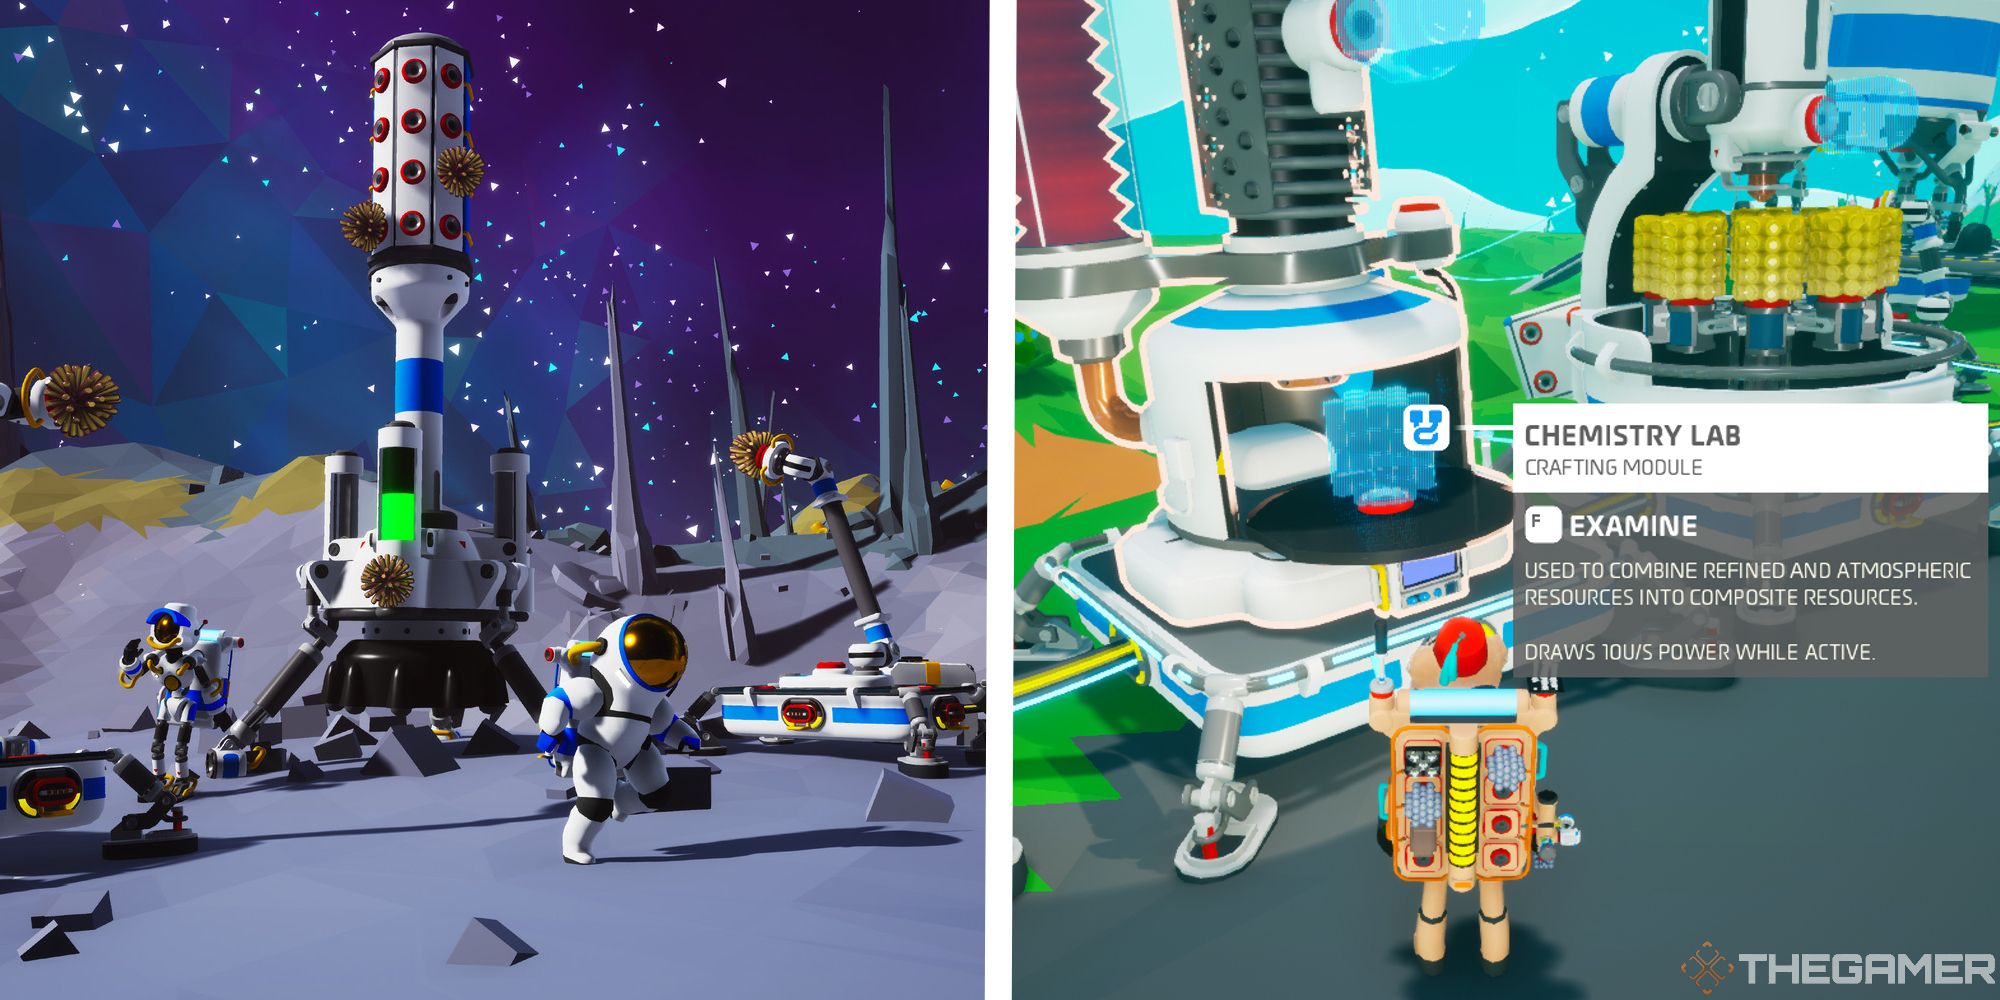 What The Chemistry Lab In Astroneer?